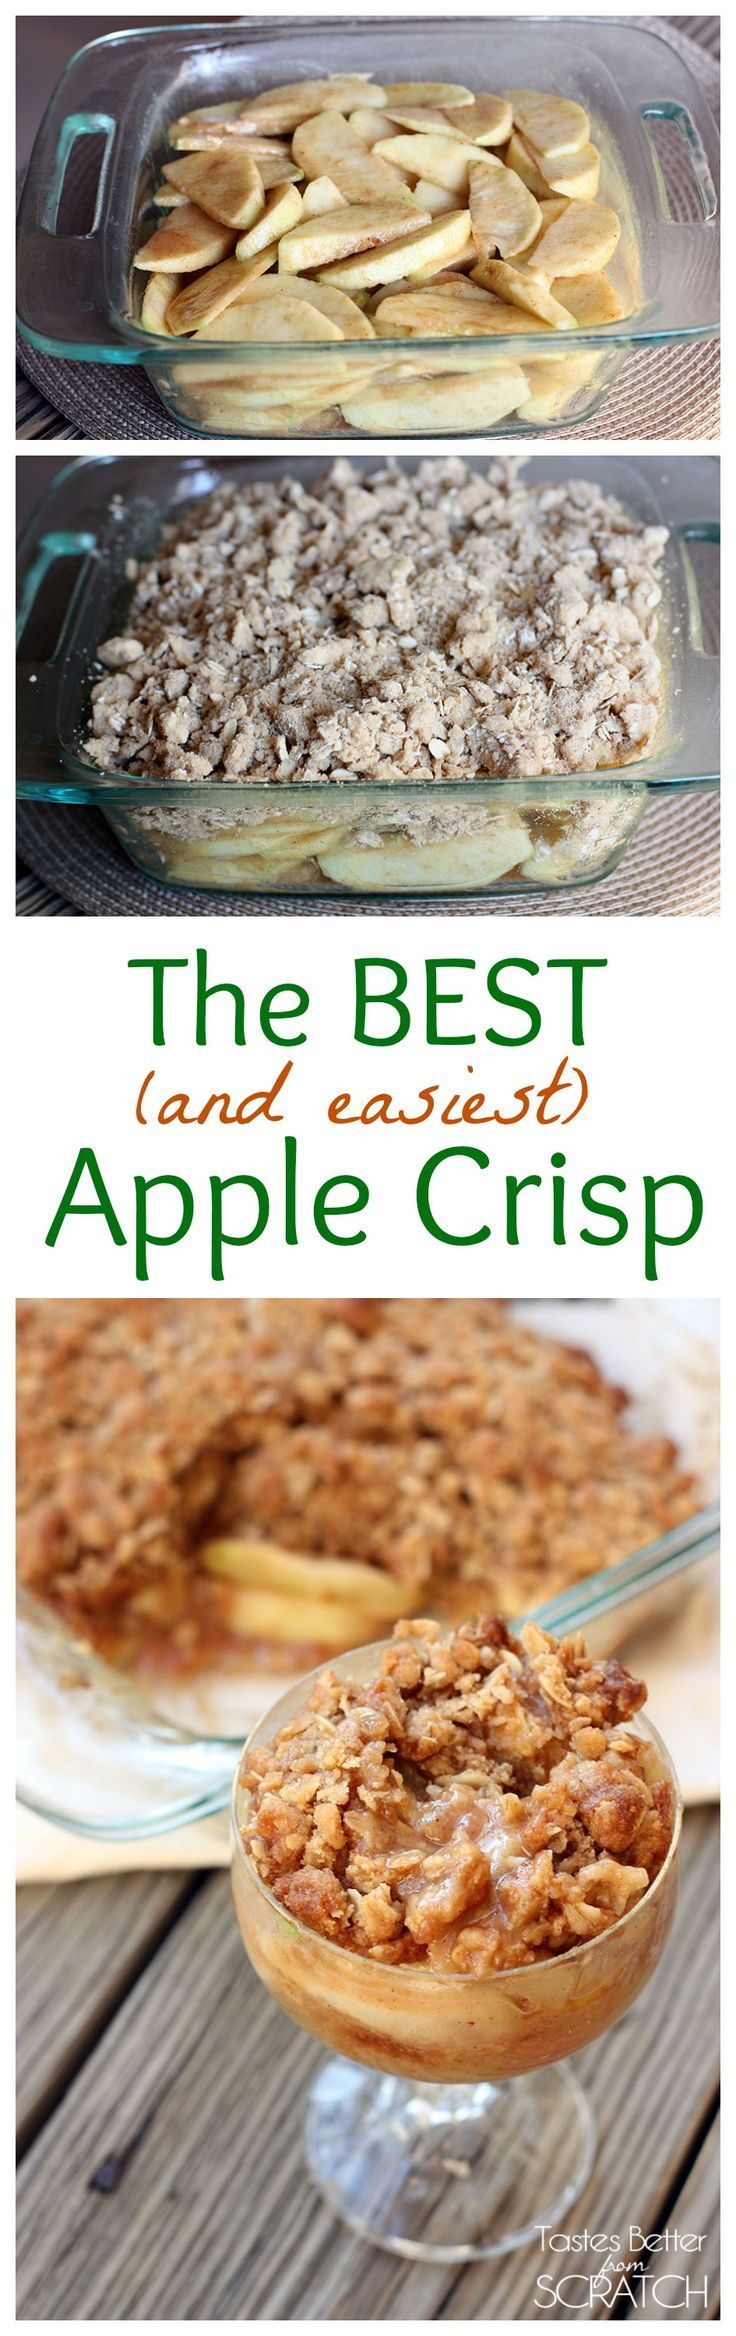 This Apple Crisp recipe is the BEST and SOO easy to make!